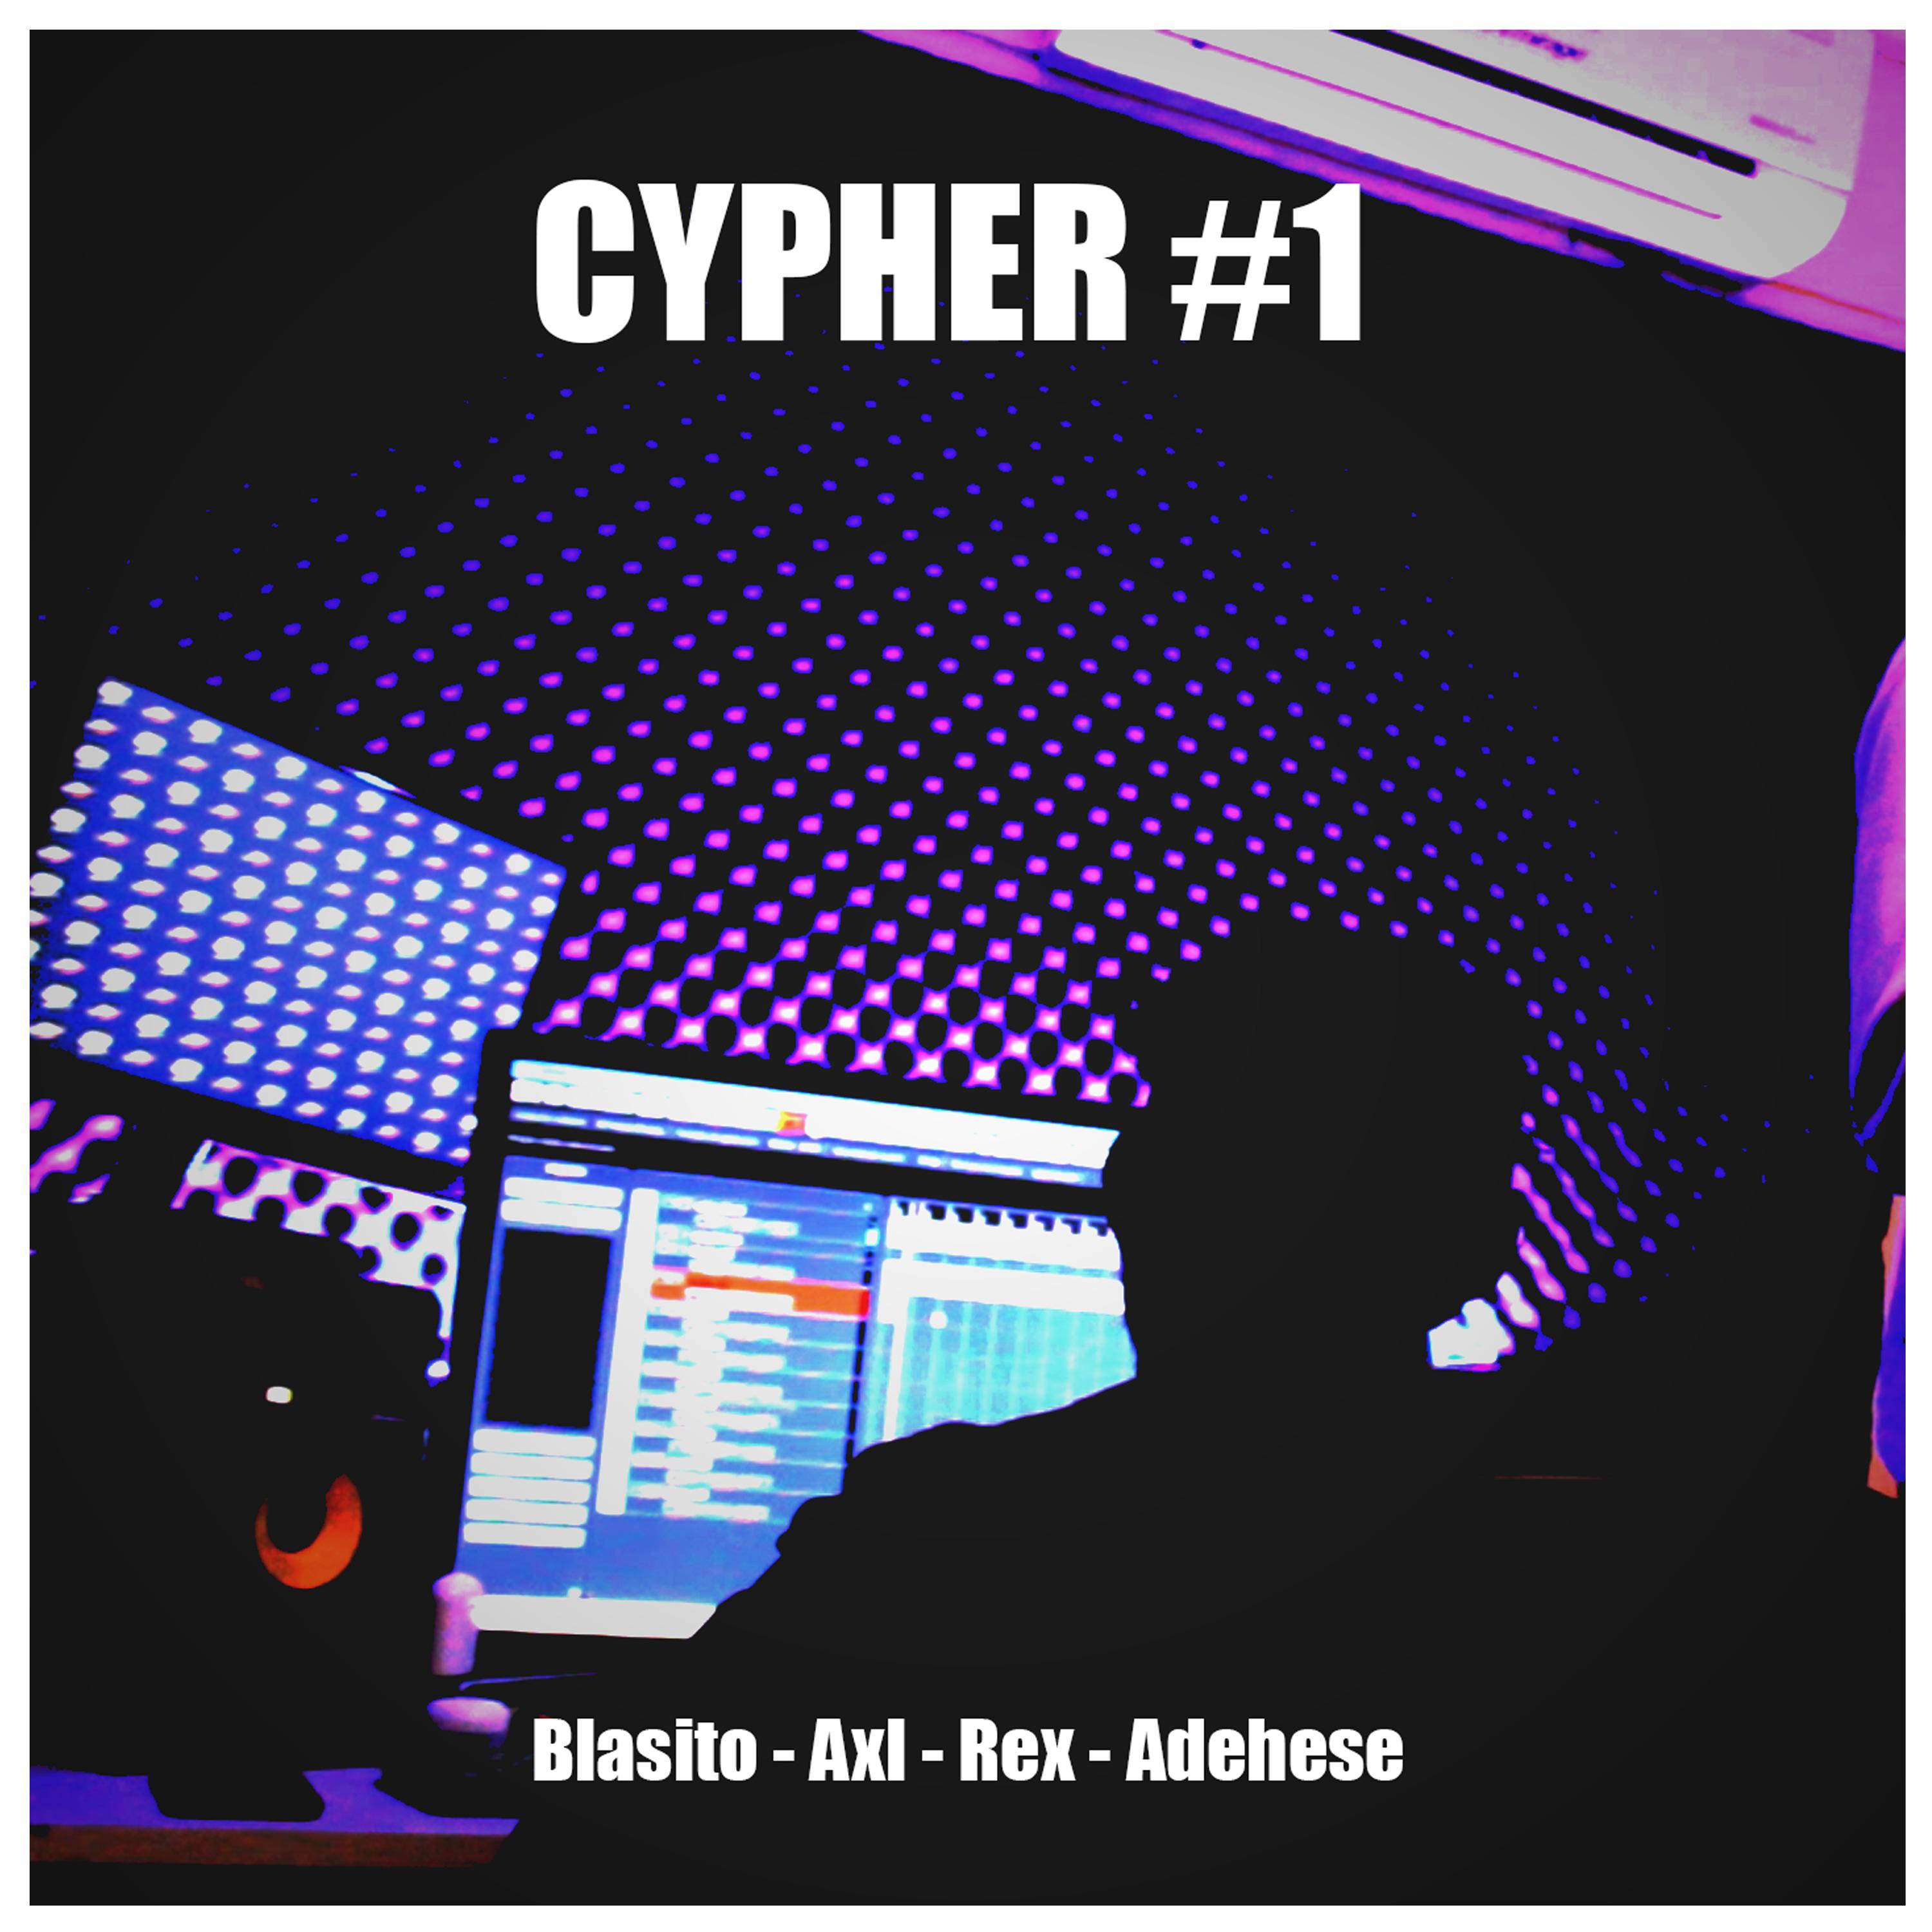 Rxp House - Cypher #1